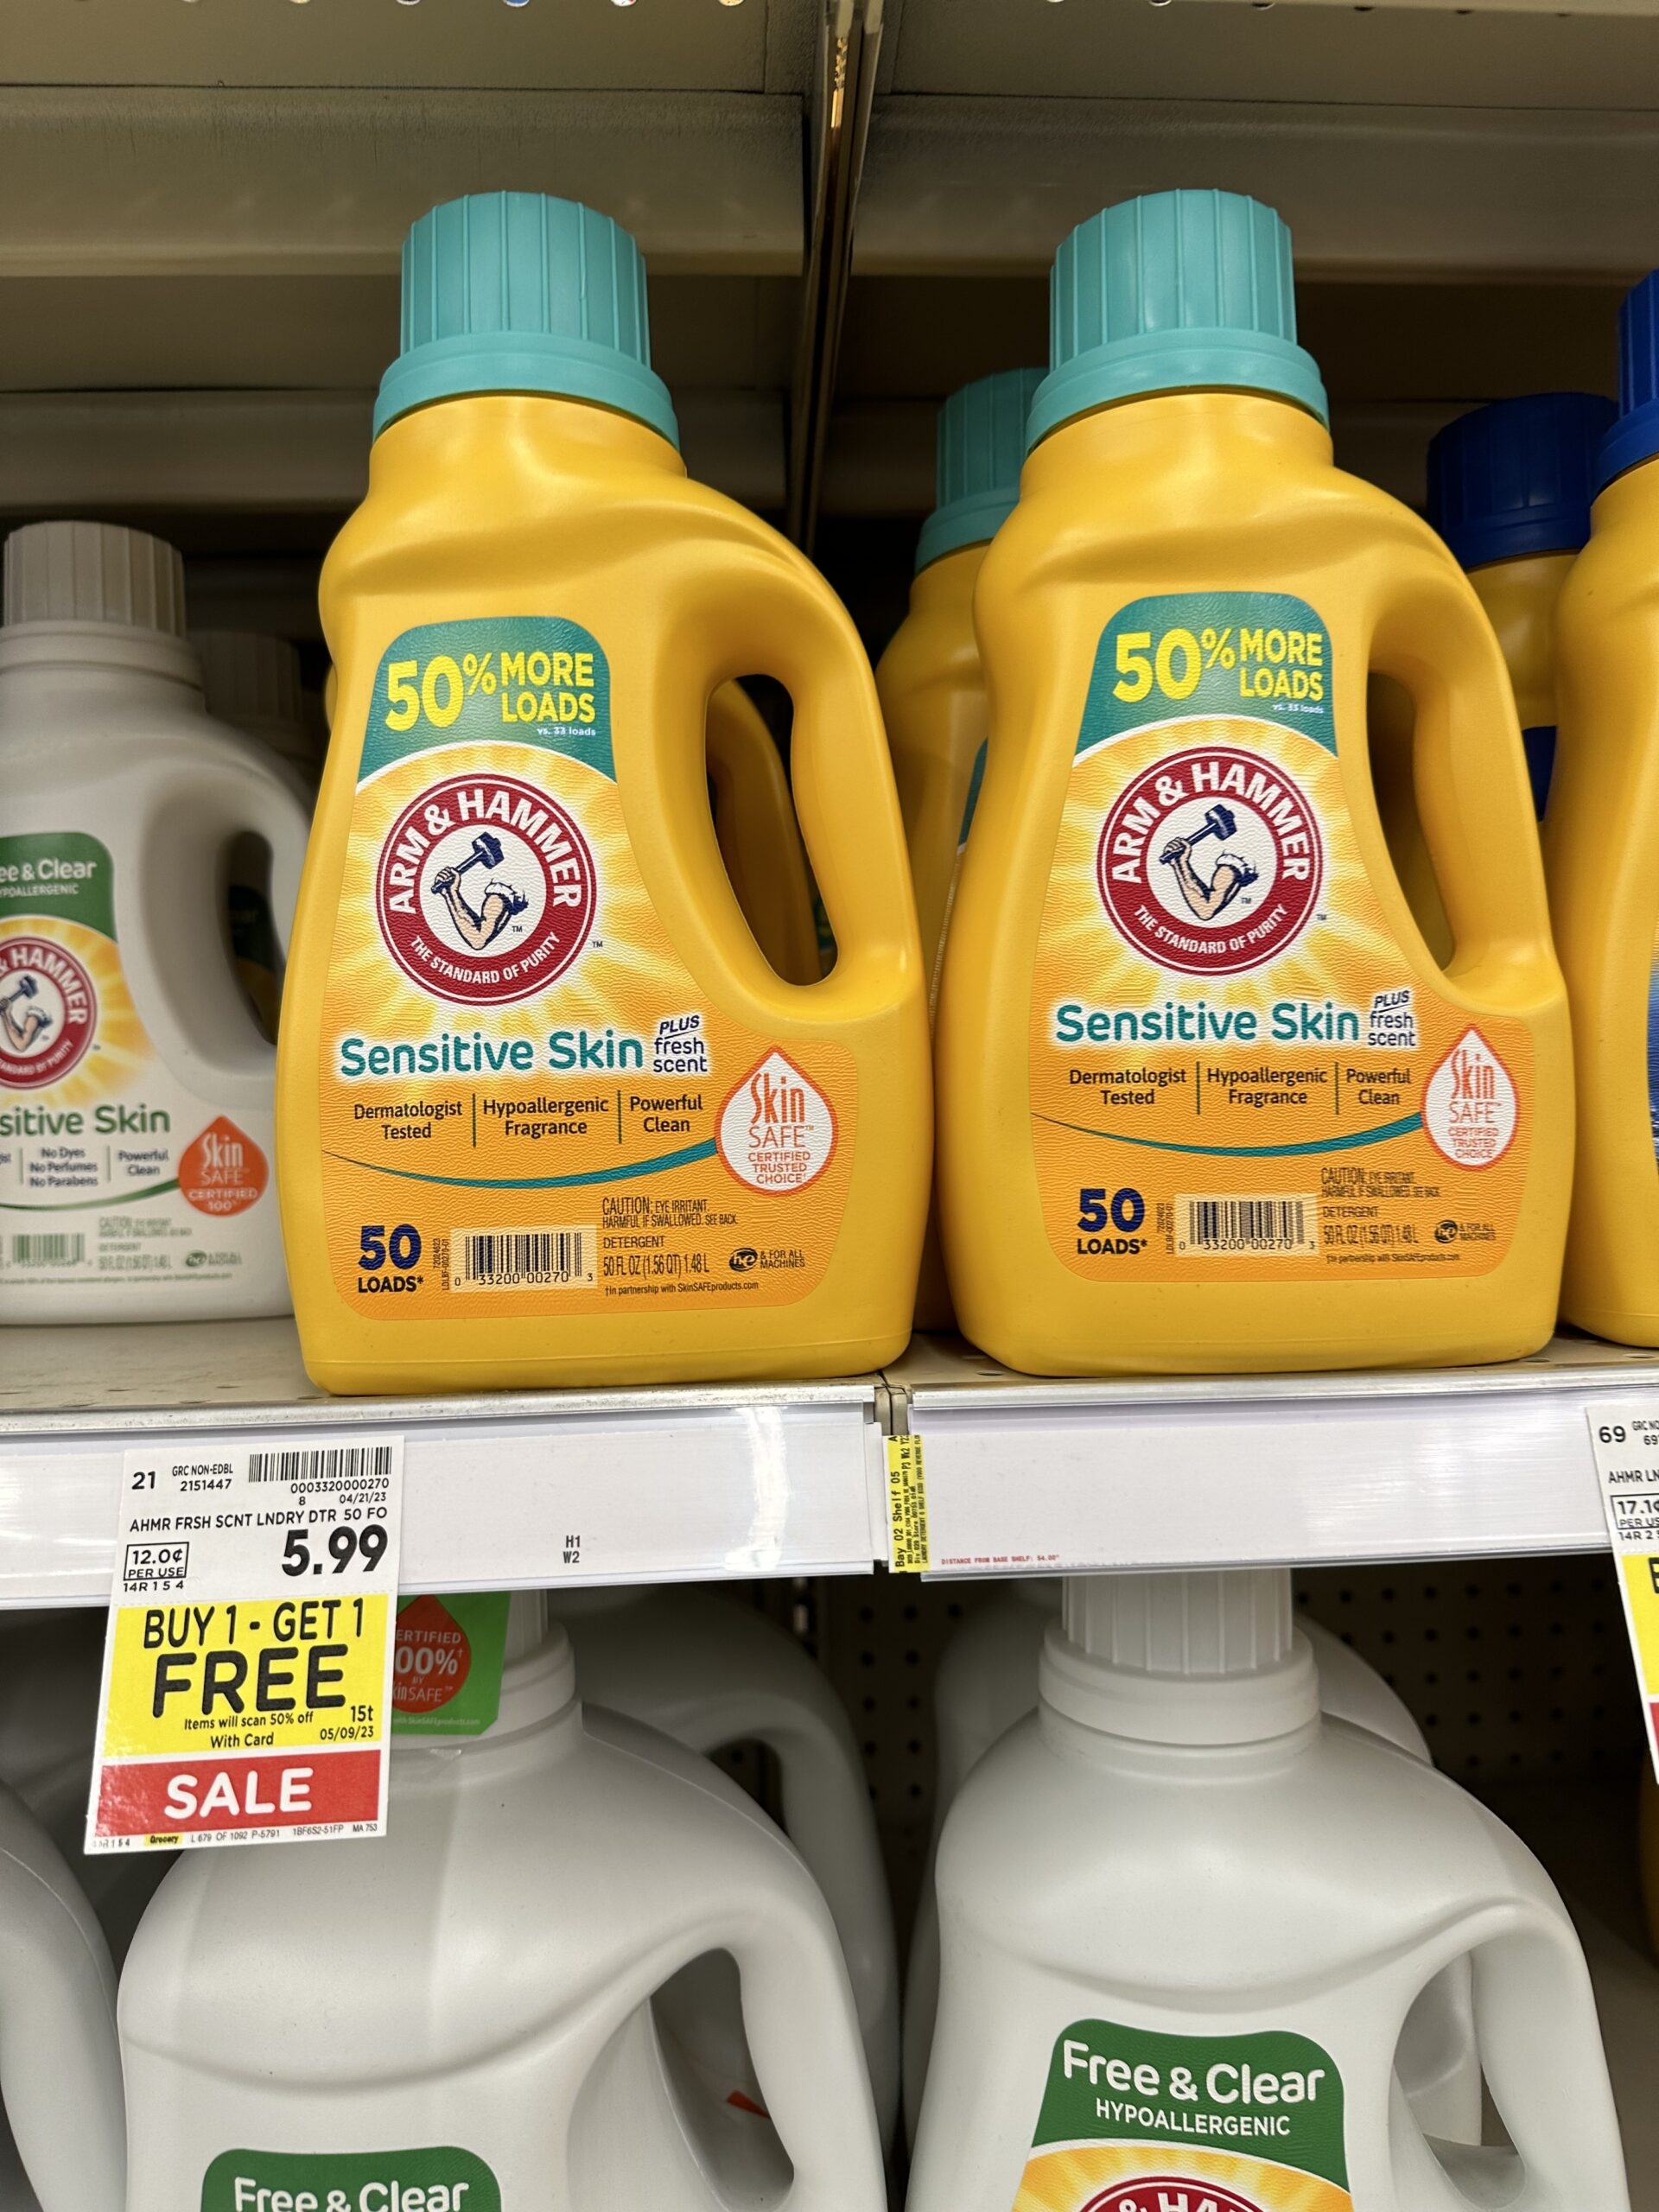 Arm Hammer Laundry Items Are B1G1 FREE At Kroger Kroger Krazy - Free Printable Arm and Hammer Coupons